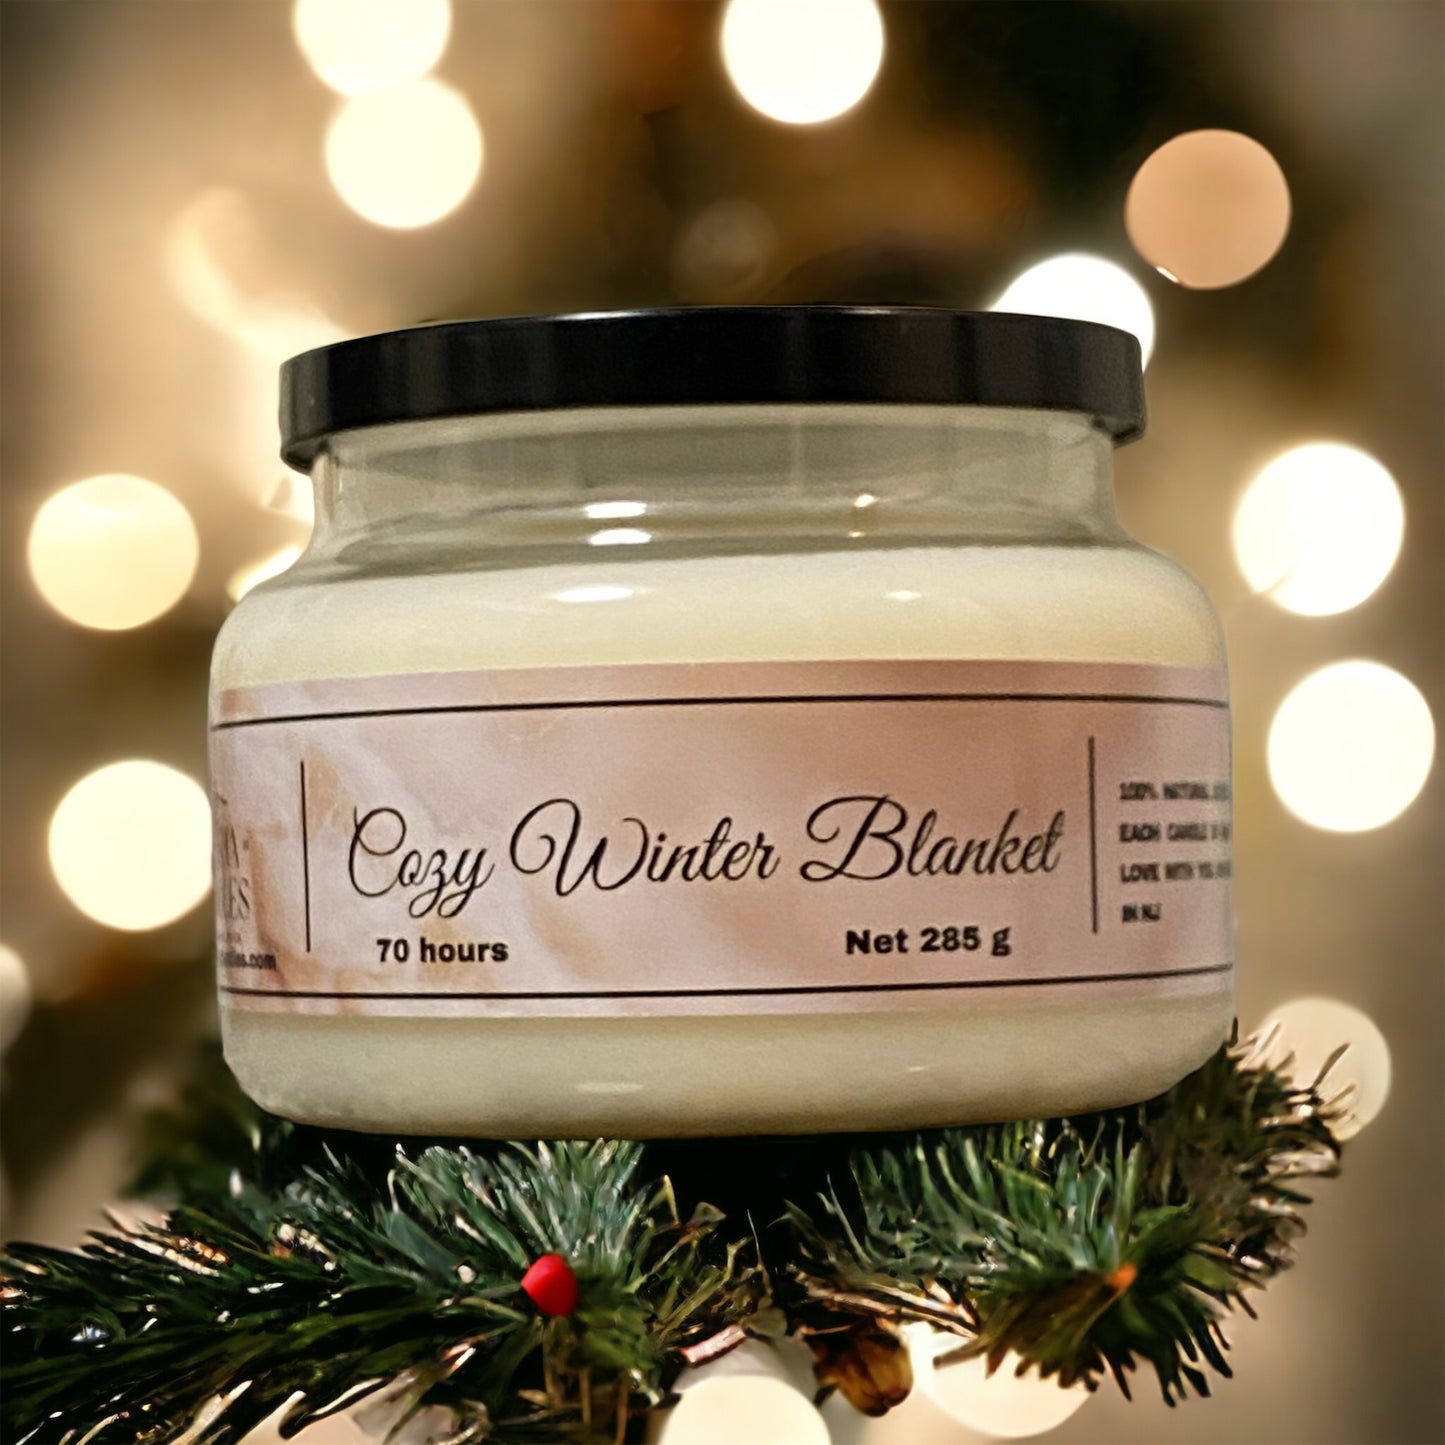 Onex Cozy Winter Blanket Hand-Poured High Quality Soy Wax Candle